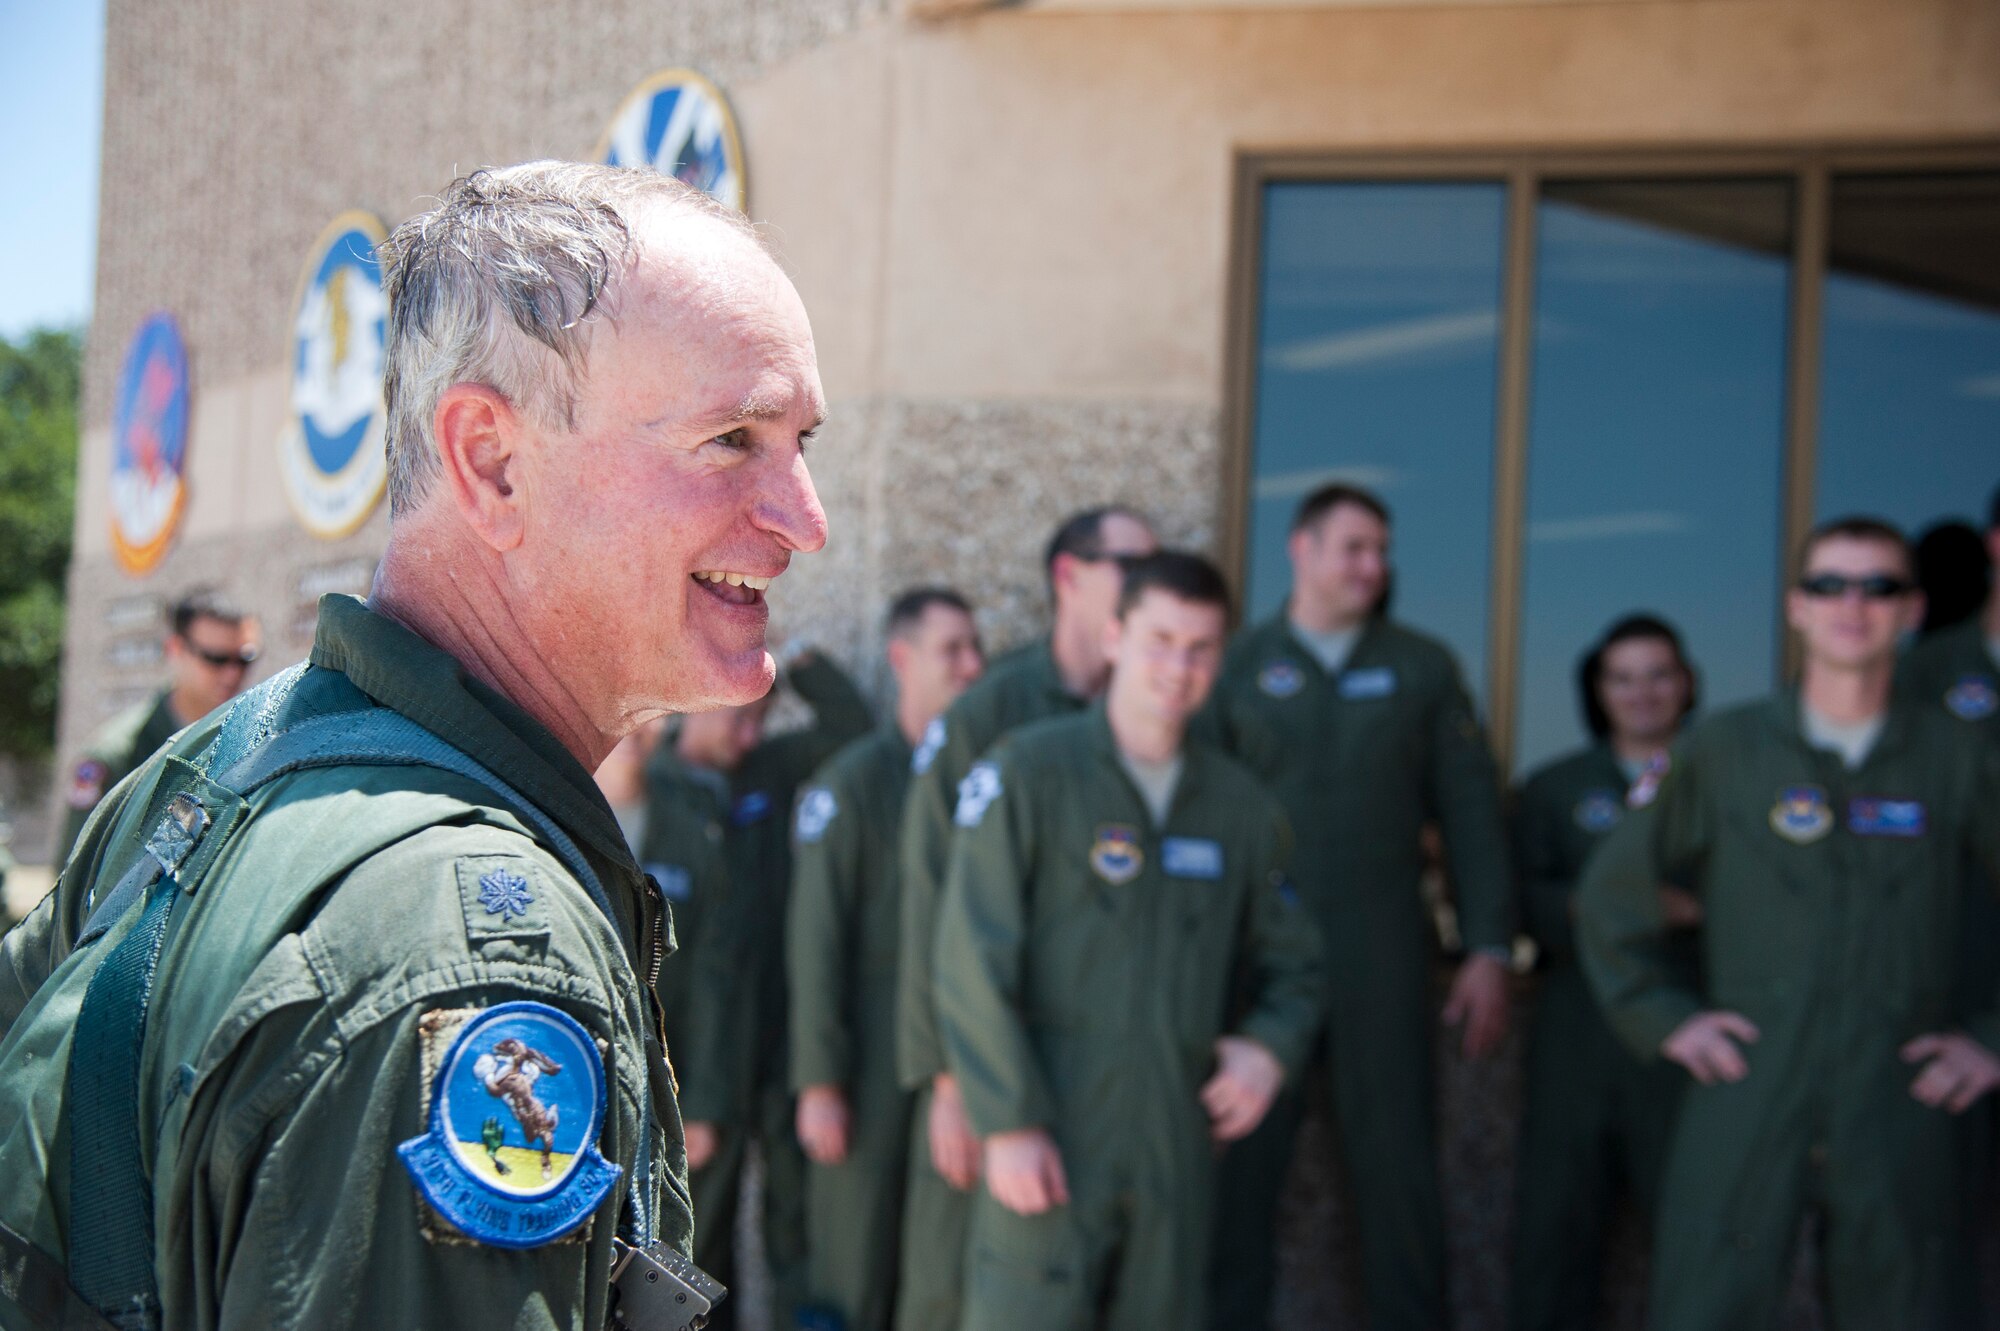 Fellow pilots greet Lt. Col. Timothy Webster, 96th Flying Training Squadron instructor pilot, upon his return from a flight in which he reached the milestone of flying 3,000 hours in the T-38 Talon at Laughlin Air Force Base, Texas, July 31, 2013. Most of his flight hours were flown at Laughlin as an instructor pilot. (U.S. Air Force photo/Airman 1st Class Jimmie D. Pike)